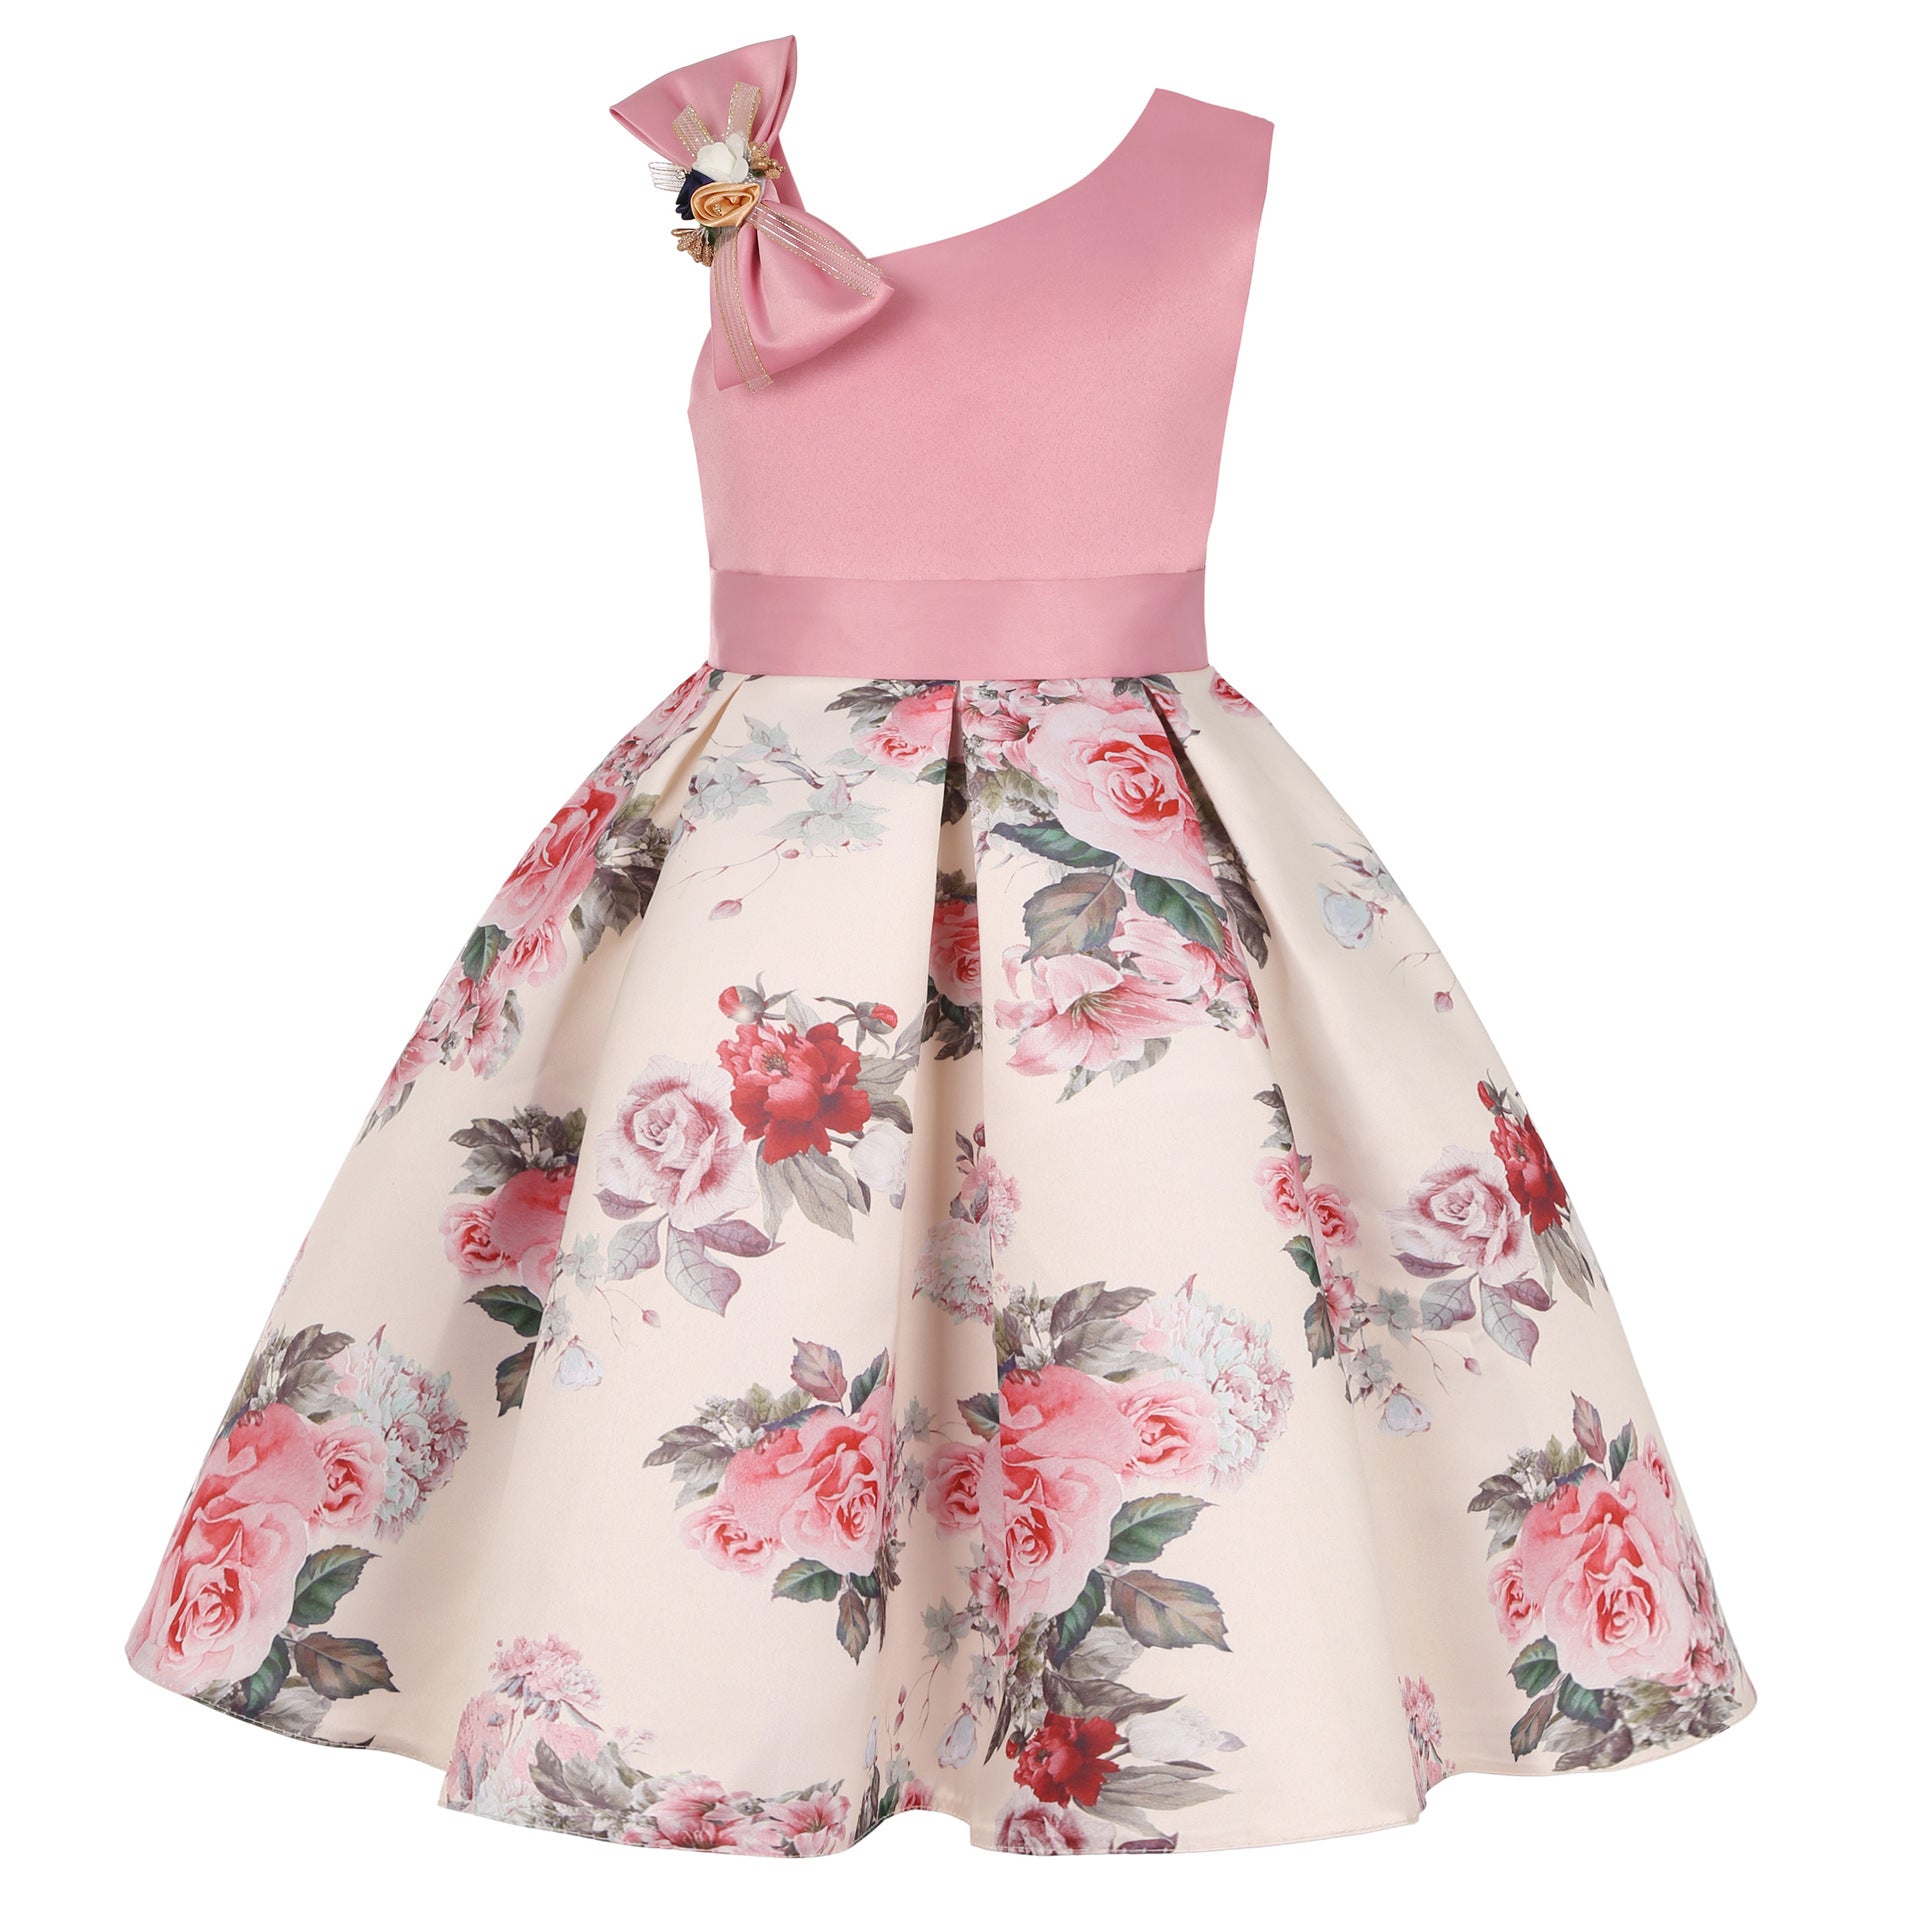 Cute Flower Girl Dresses One Shoulder Ball Gown with Bow Floral Printed Prom Dress